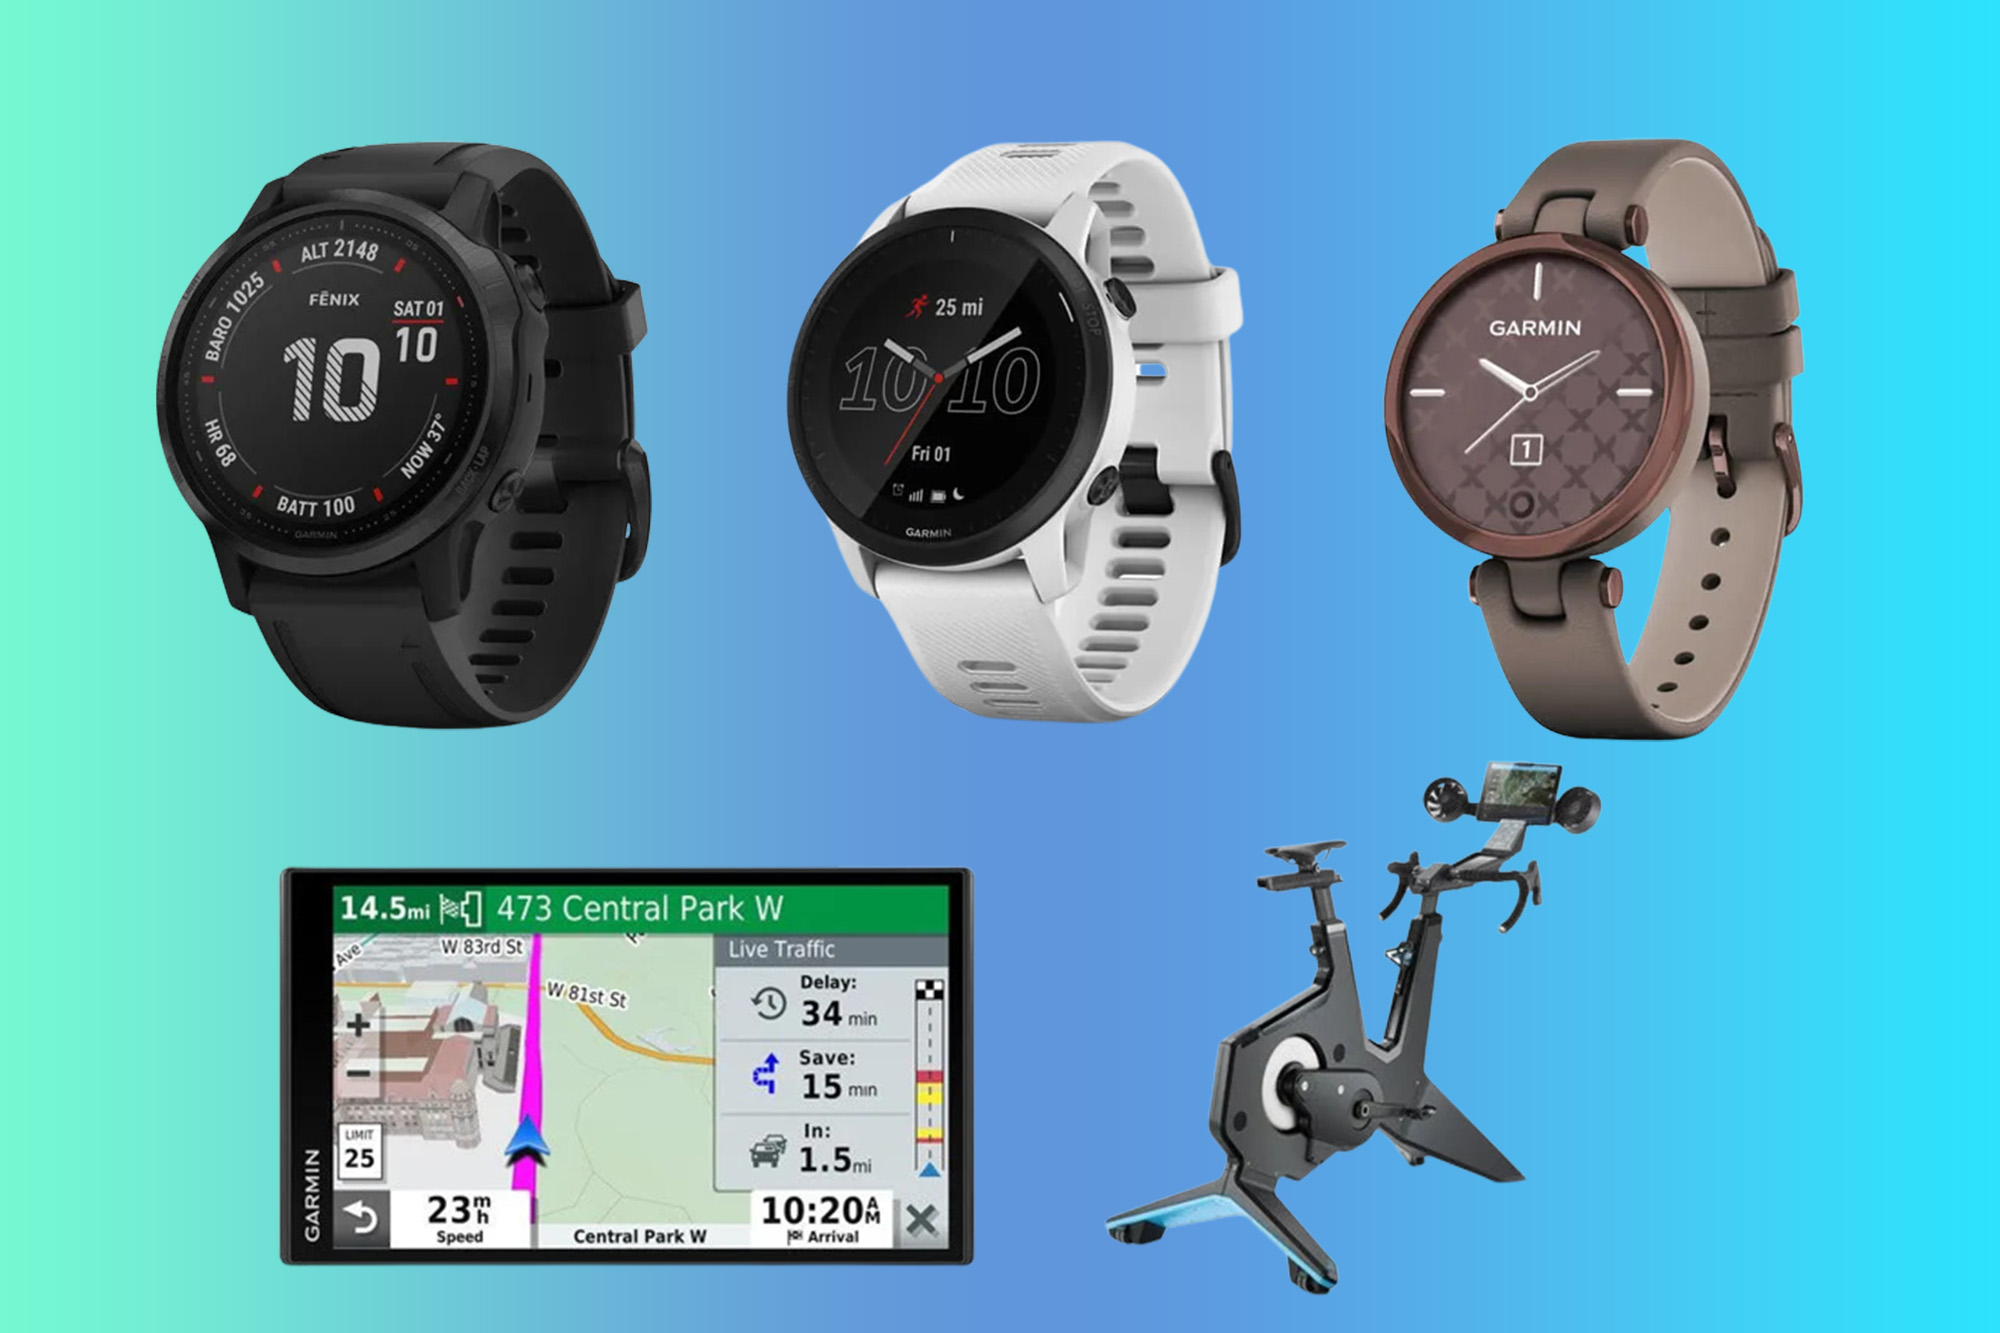 Celebrate Garmin’s birthday with up to $400 in savings